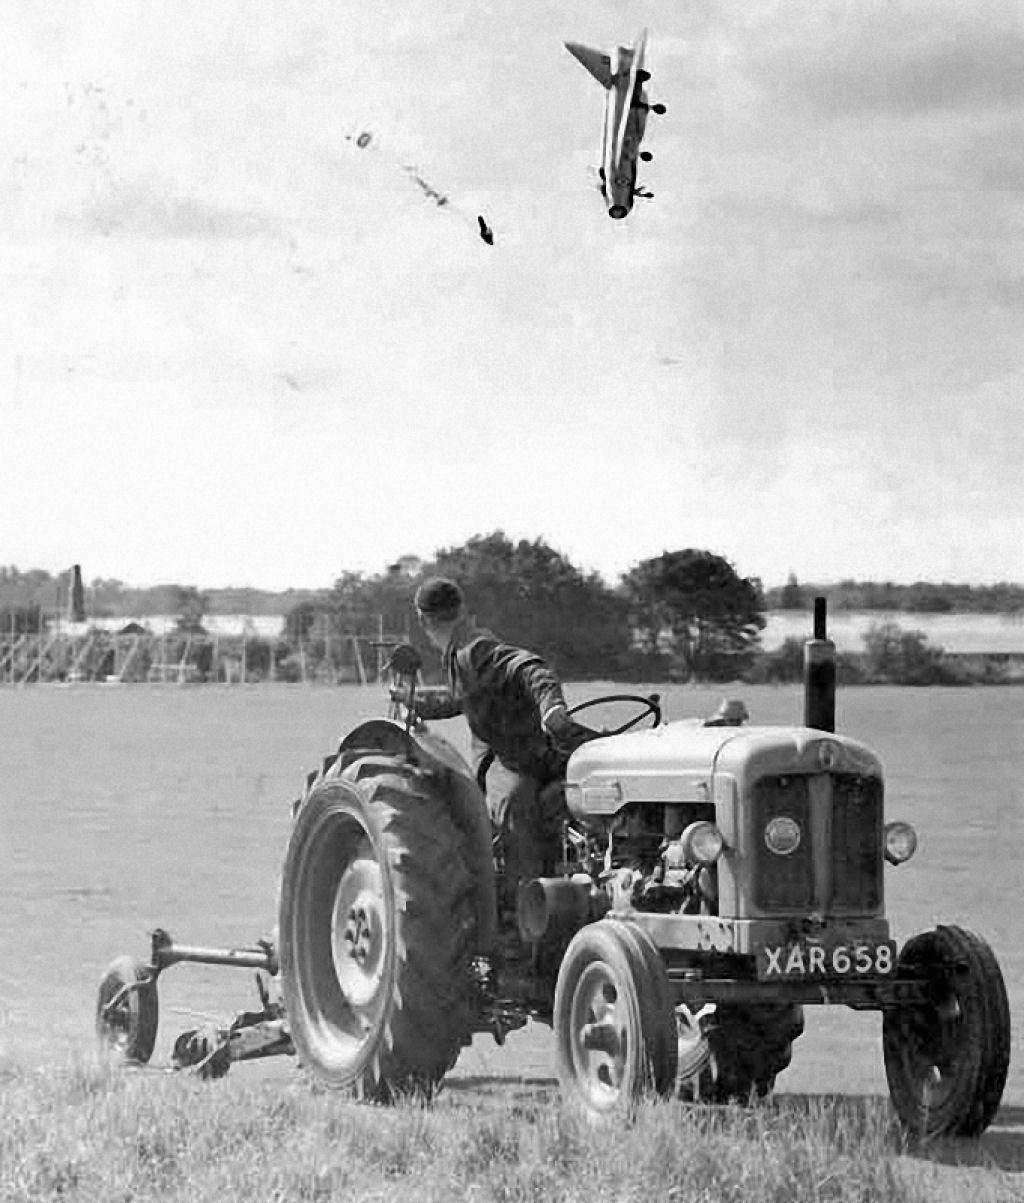 test pilot george aird narrowly escapes death by ejecting sideways from a prototype jet that nosedived (1962).